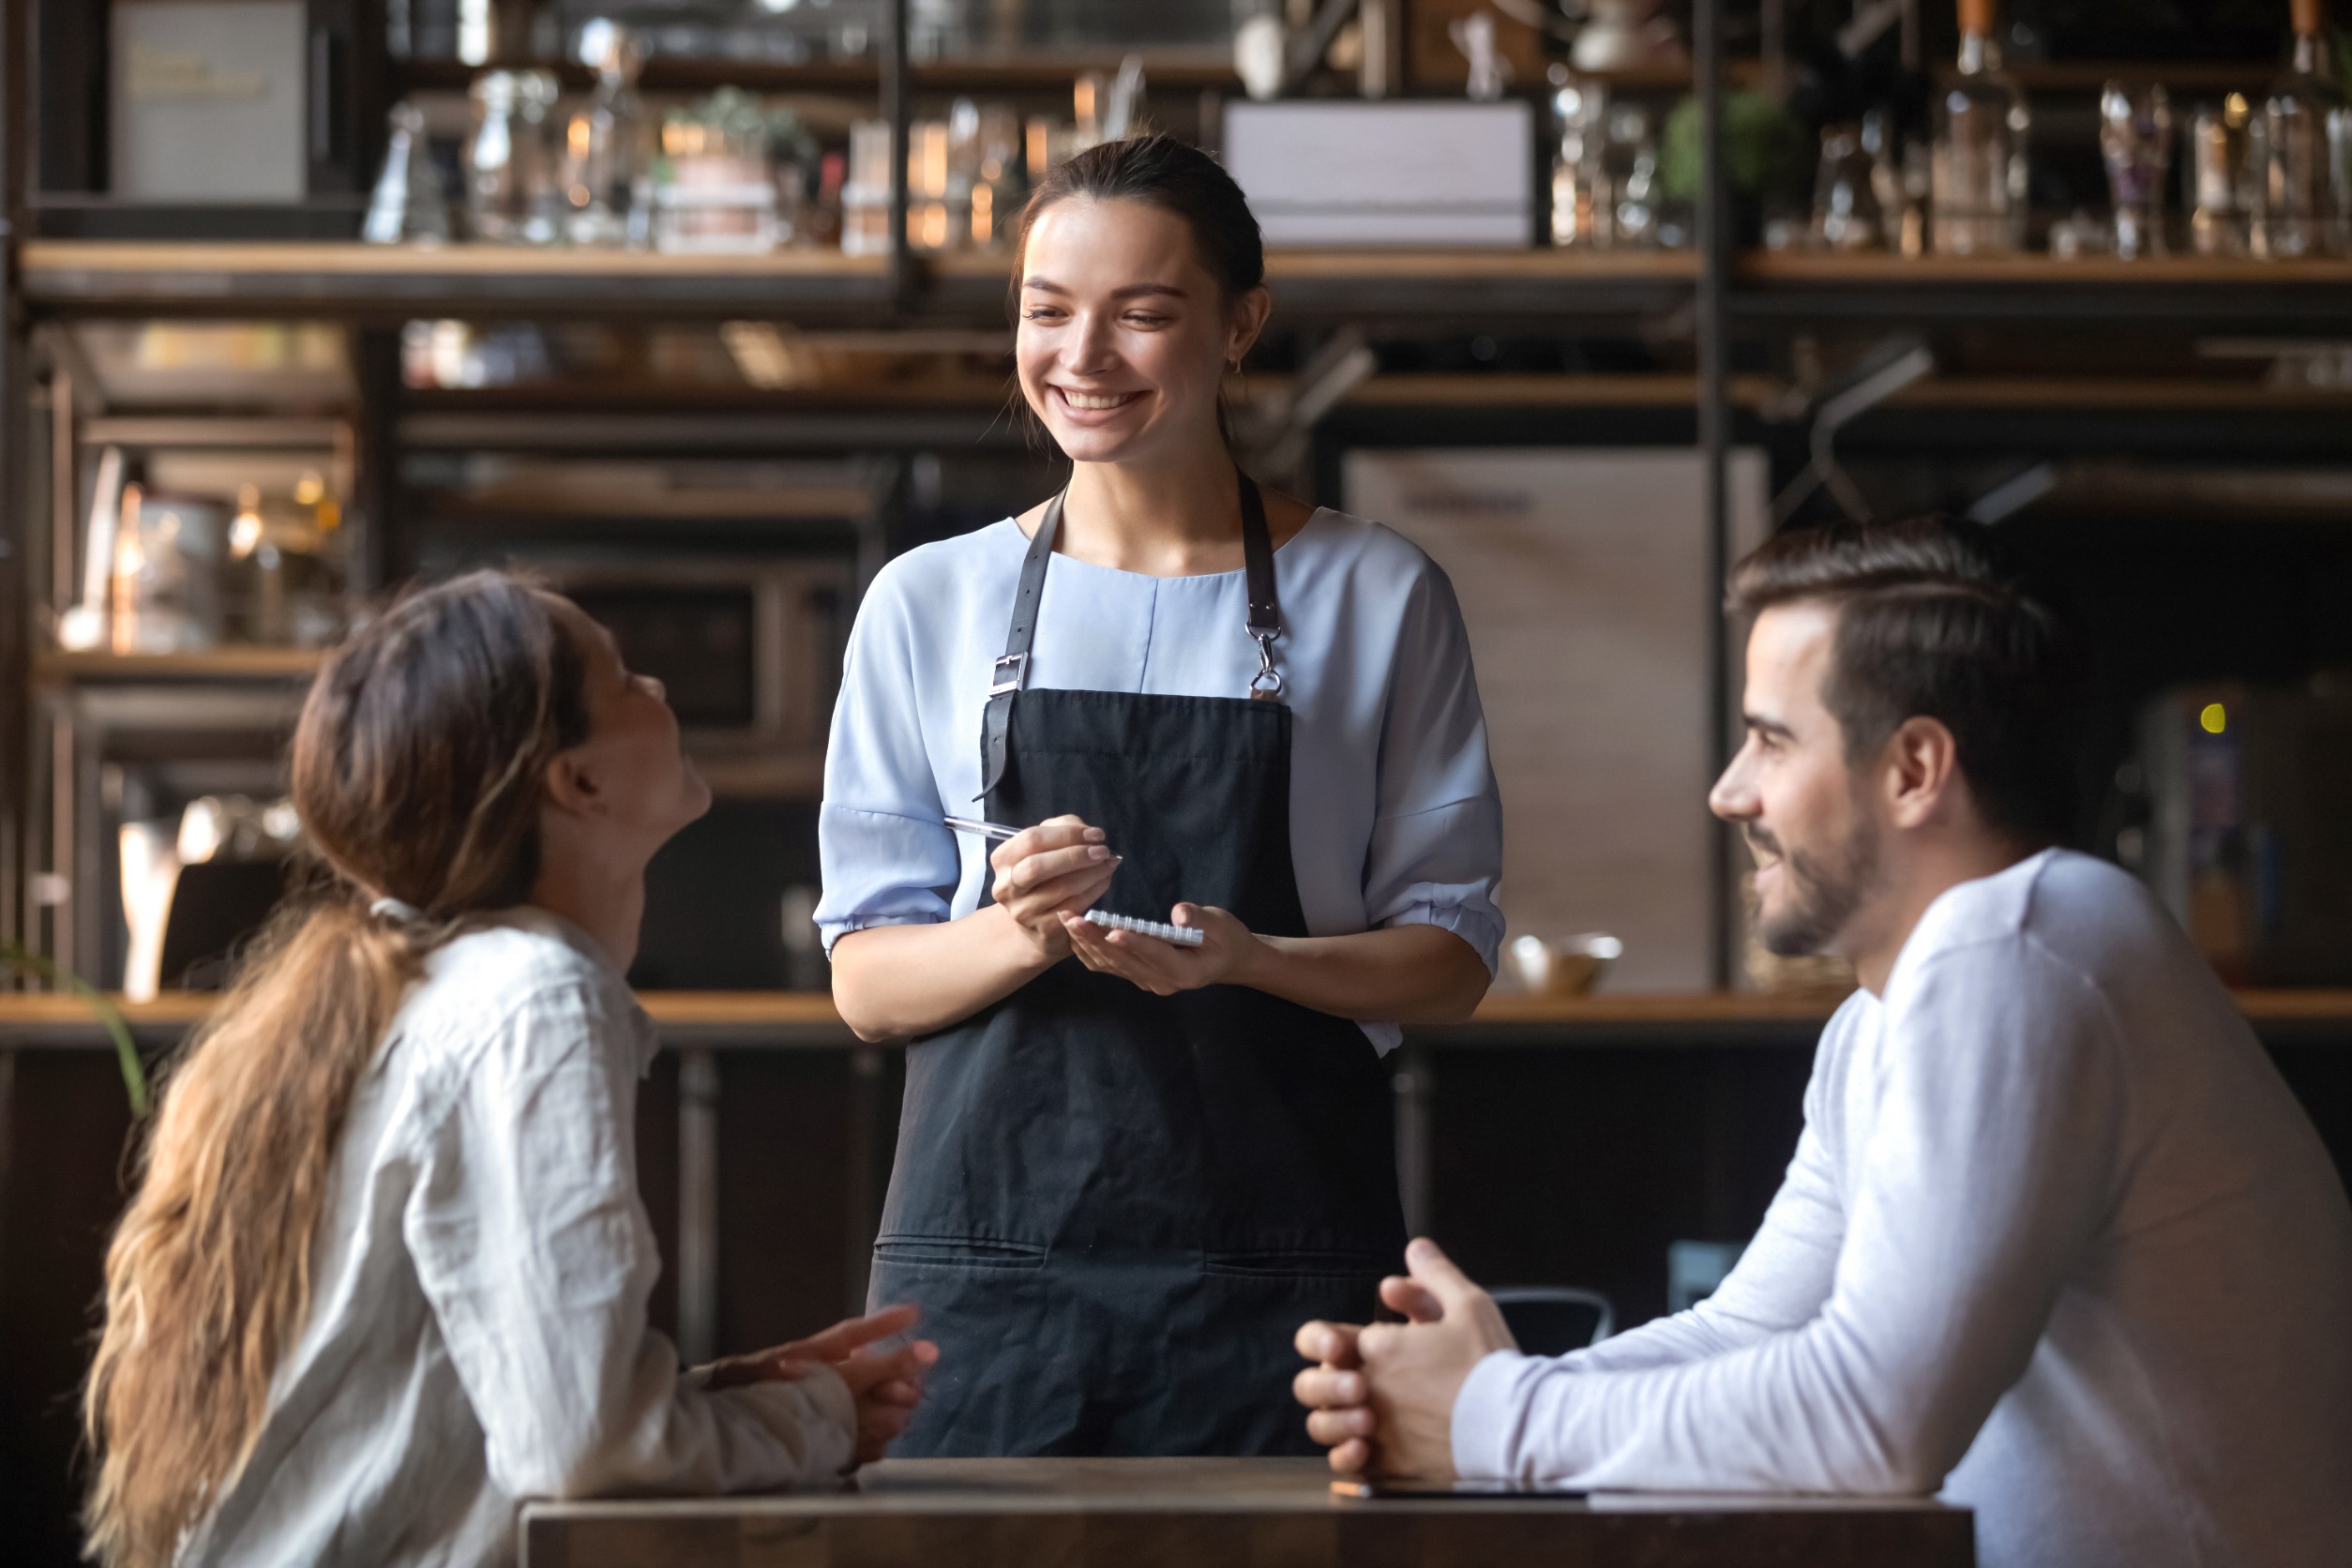 "Was the service exceptional or just okay?" Evaluating the quality of service can affect how much you decide to tip. If the service was outstanding, you might lean toward a higher percentage. Conversely, mediocre service might make you consider sticking to the minimum standard. :: 123rf